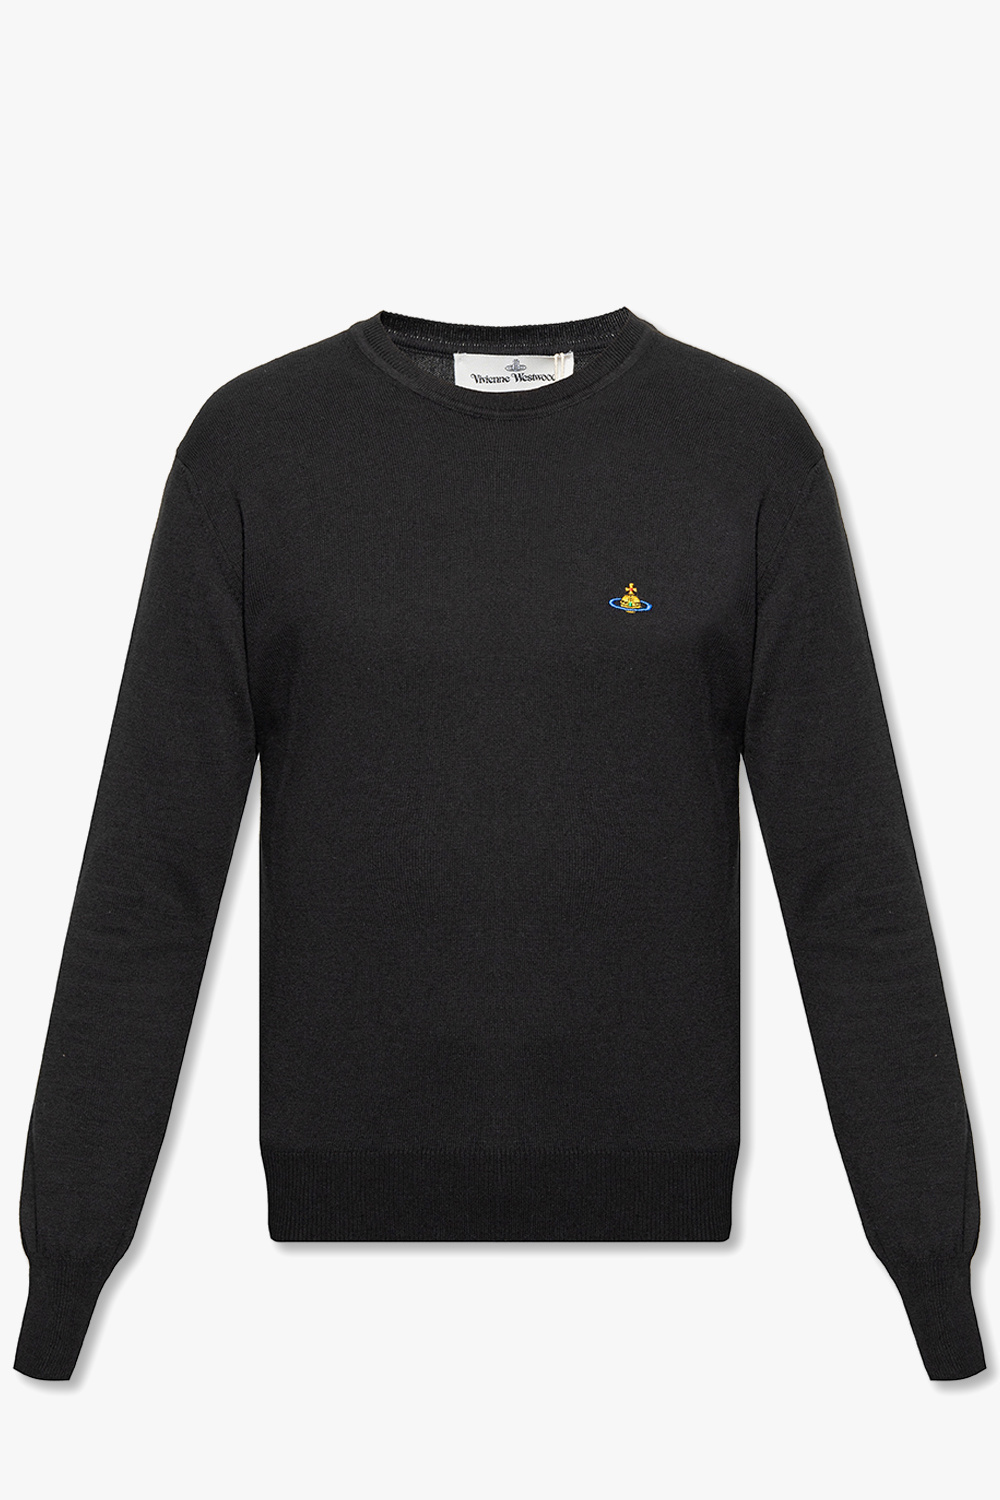 Vivienne Westwood sweater T-Shirt with logo